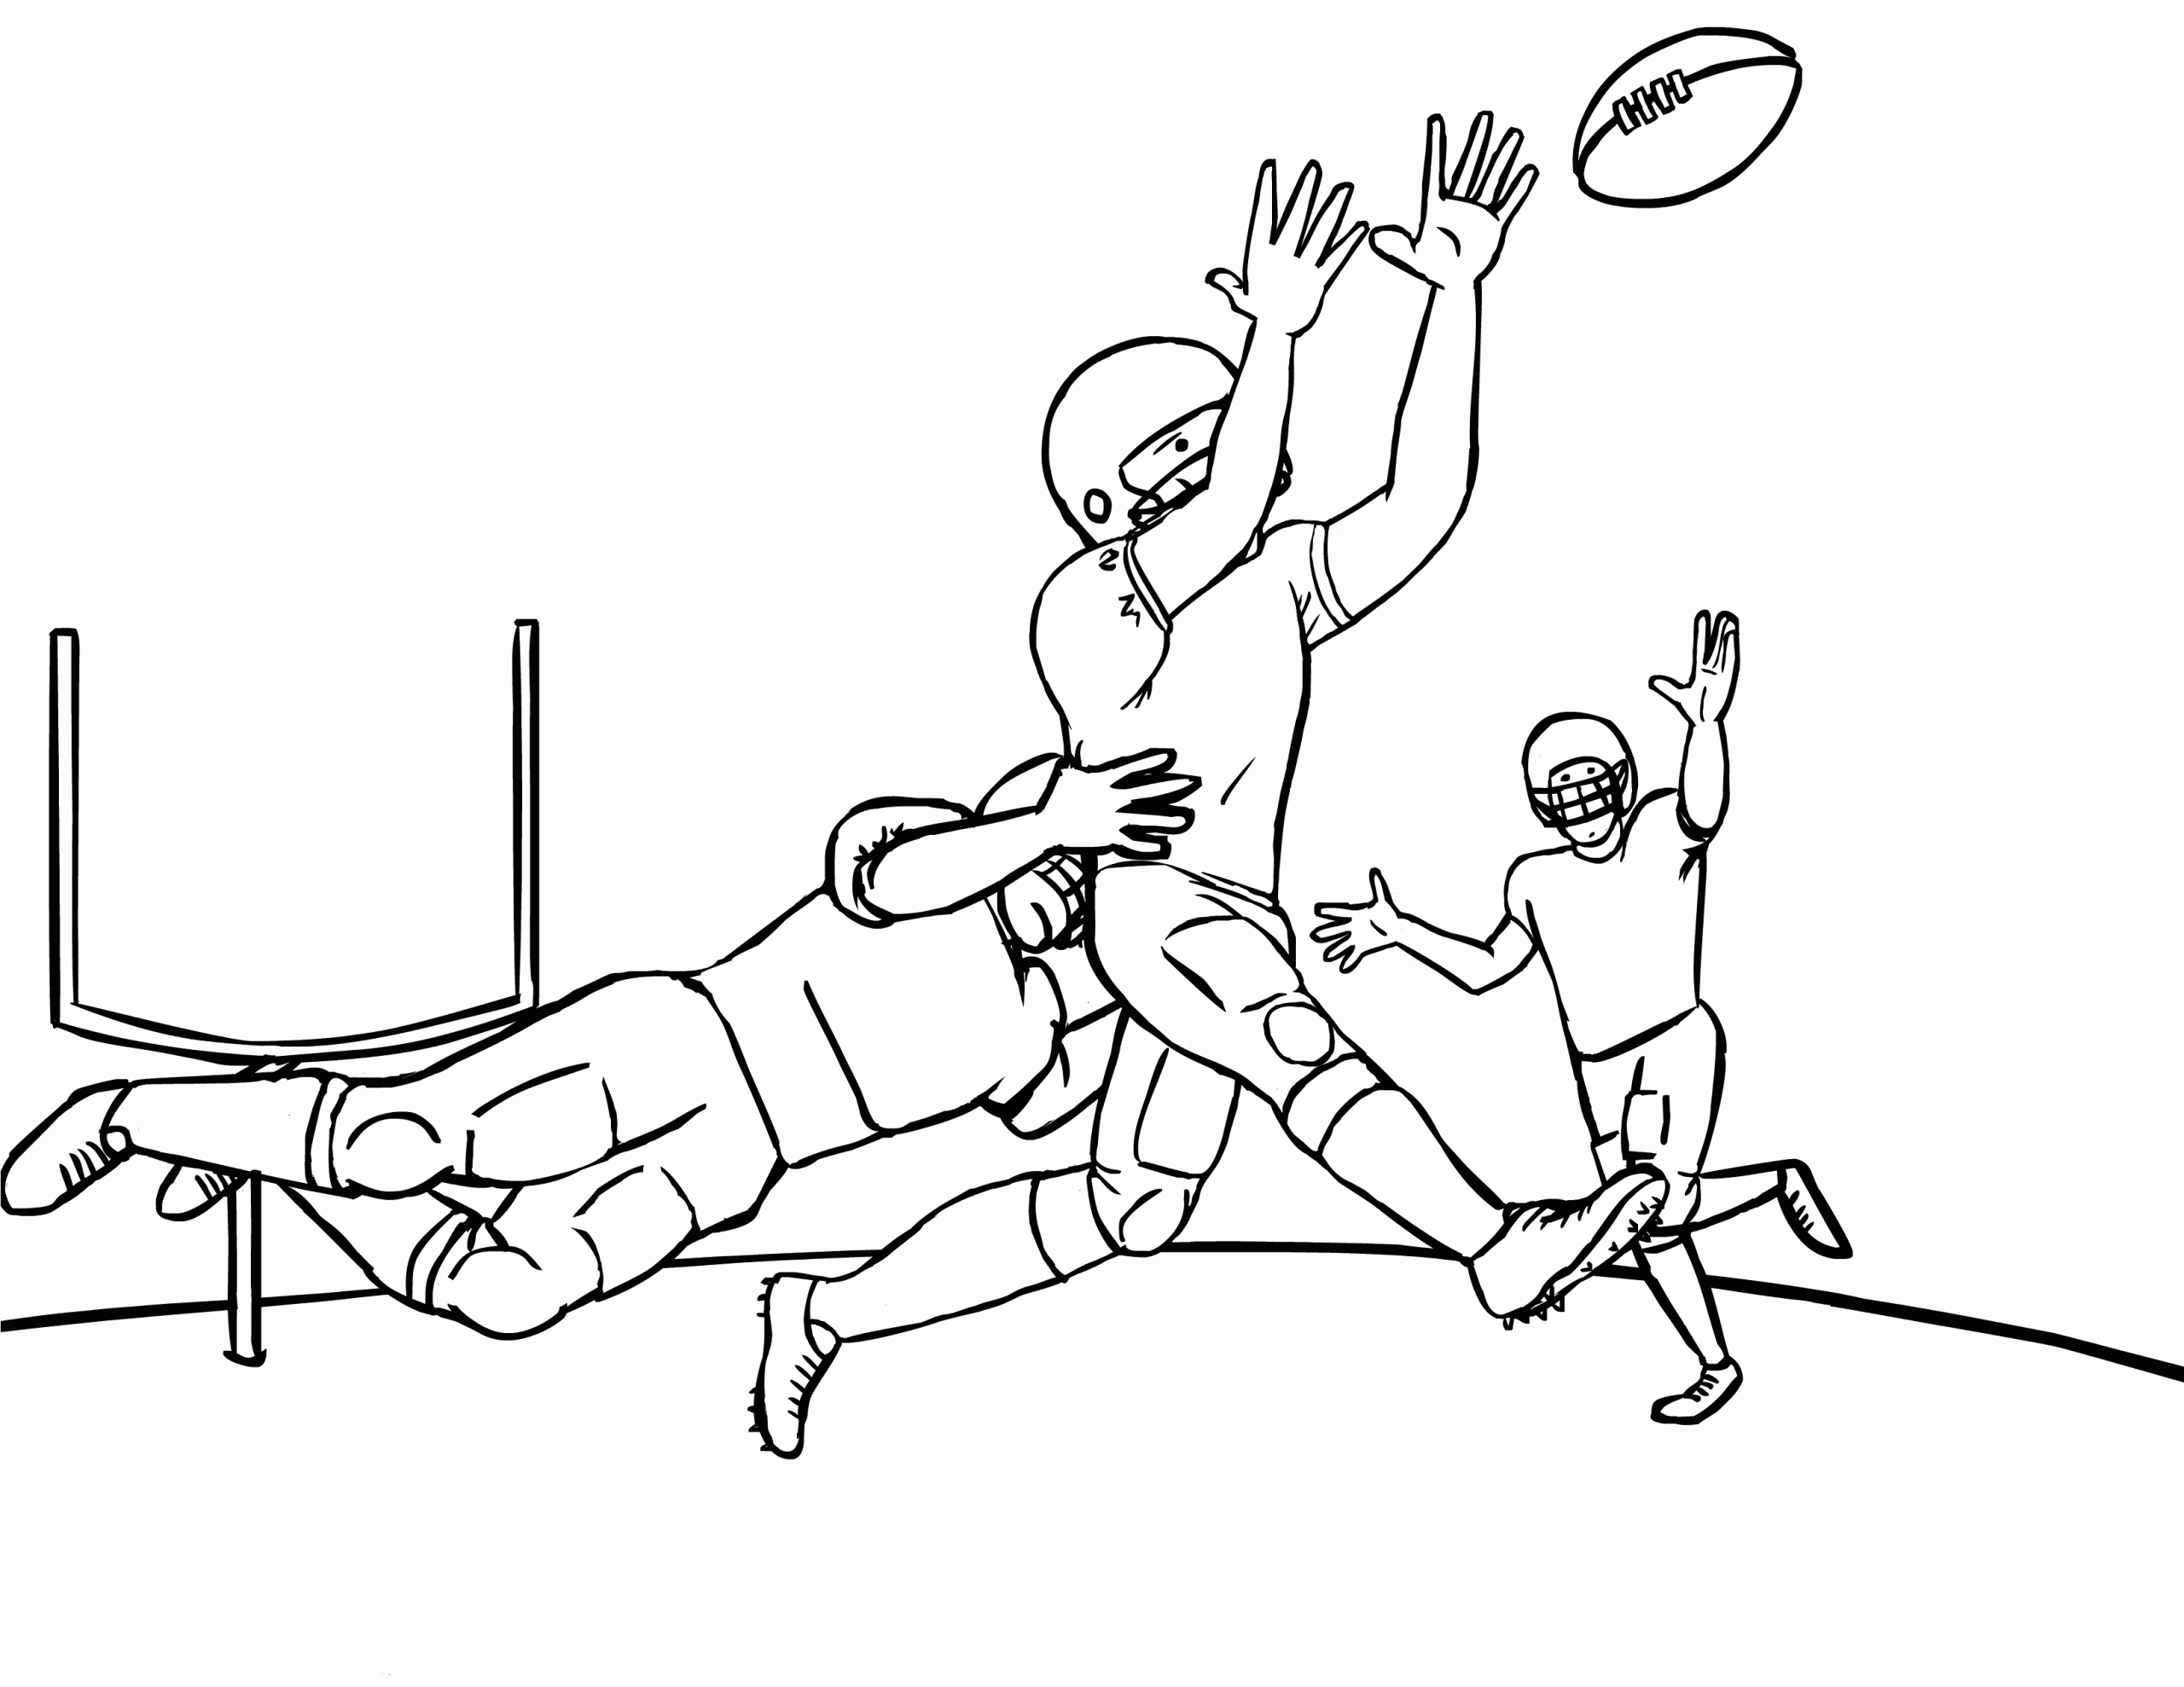 Coloring Pages For Boys Football Teams
 Free Printable Football Coloring Pages for Kids Best